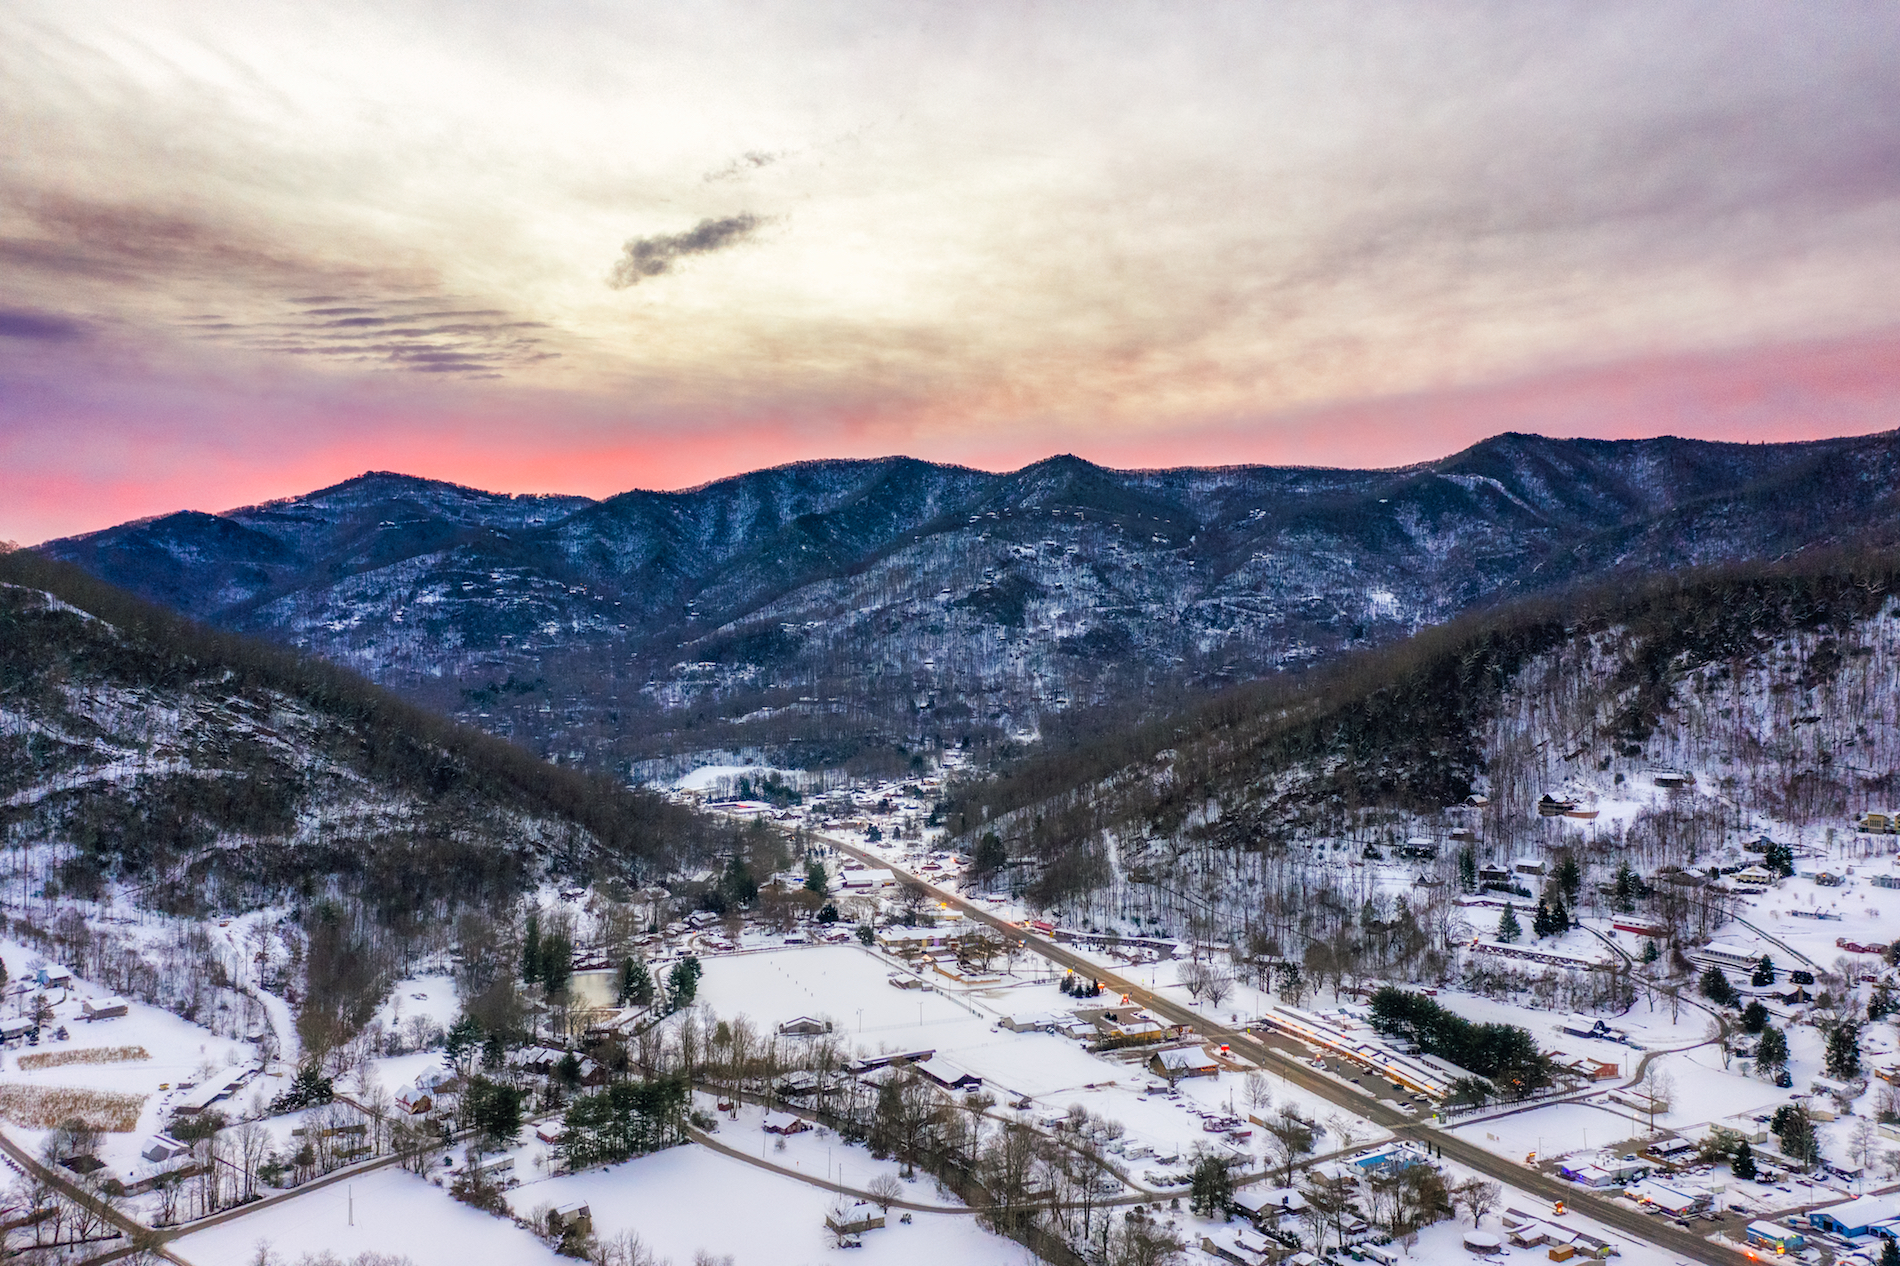 Winter adventures await in North Carolina's Great Smoky Mountains